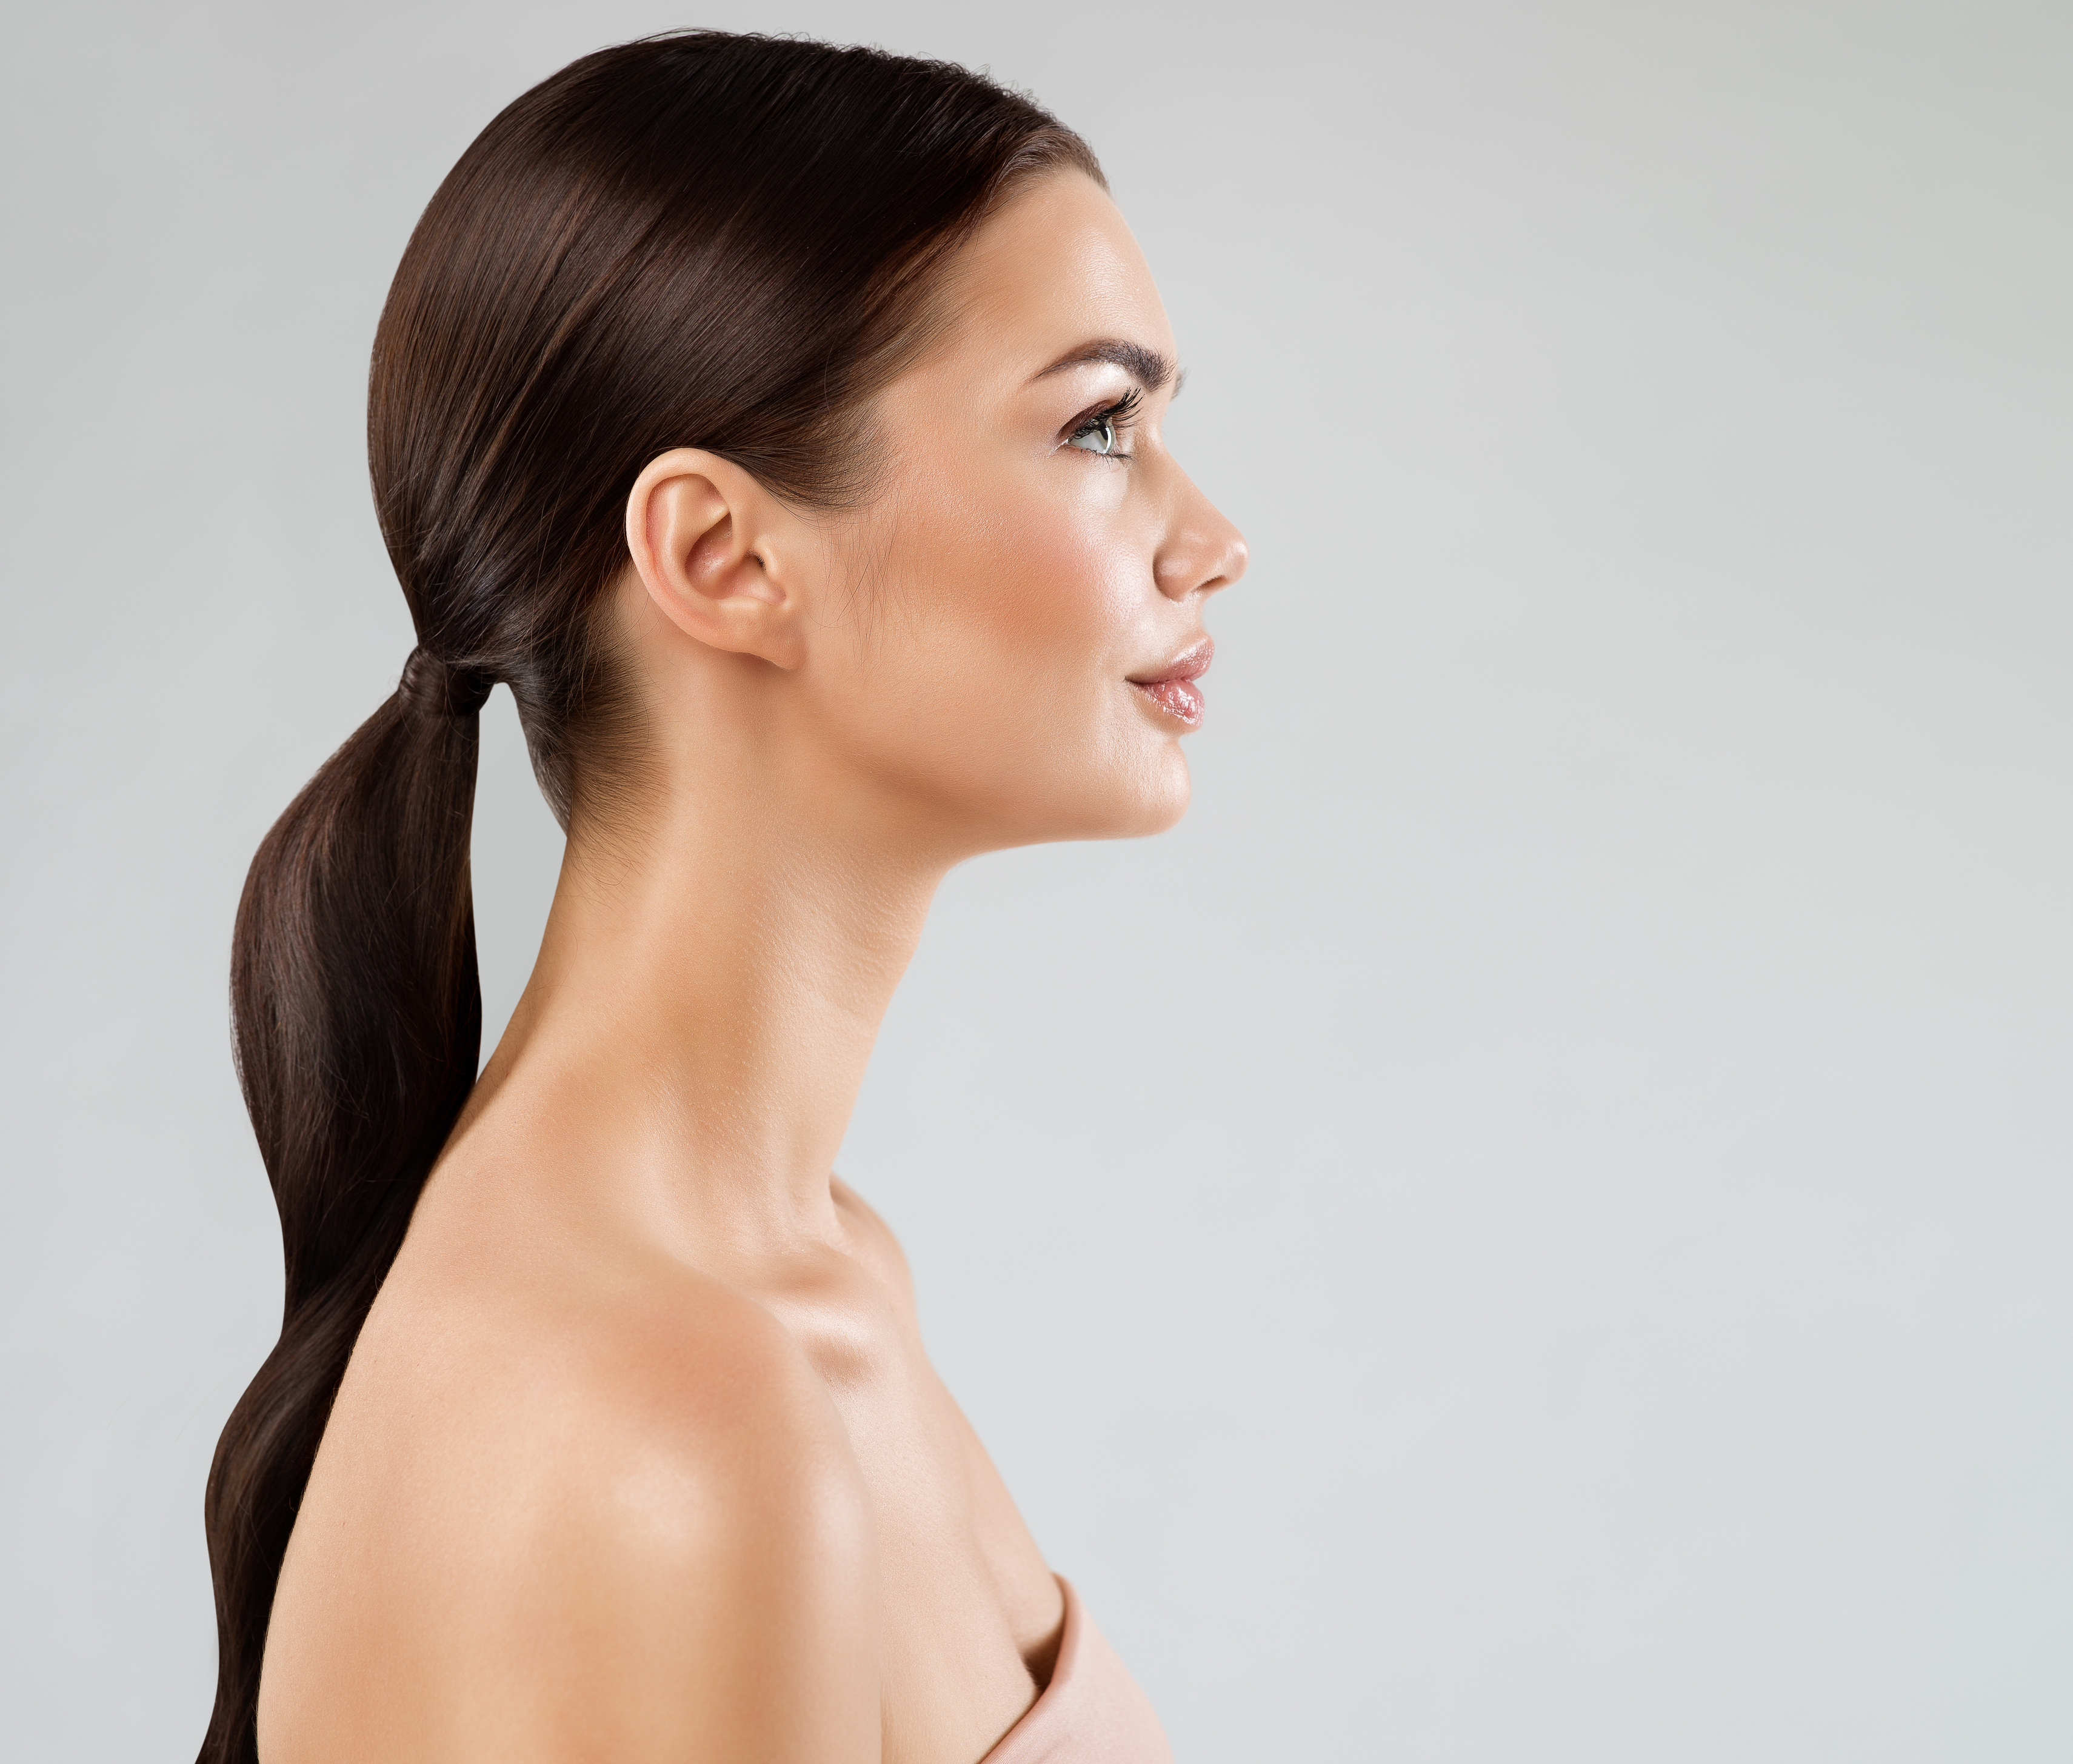 Bloom Facial Plastic Surgery Blog | Choosing the Right Surgeon for Your Rhinoplasty: What to Look For